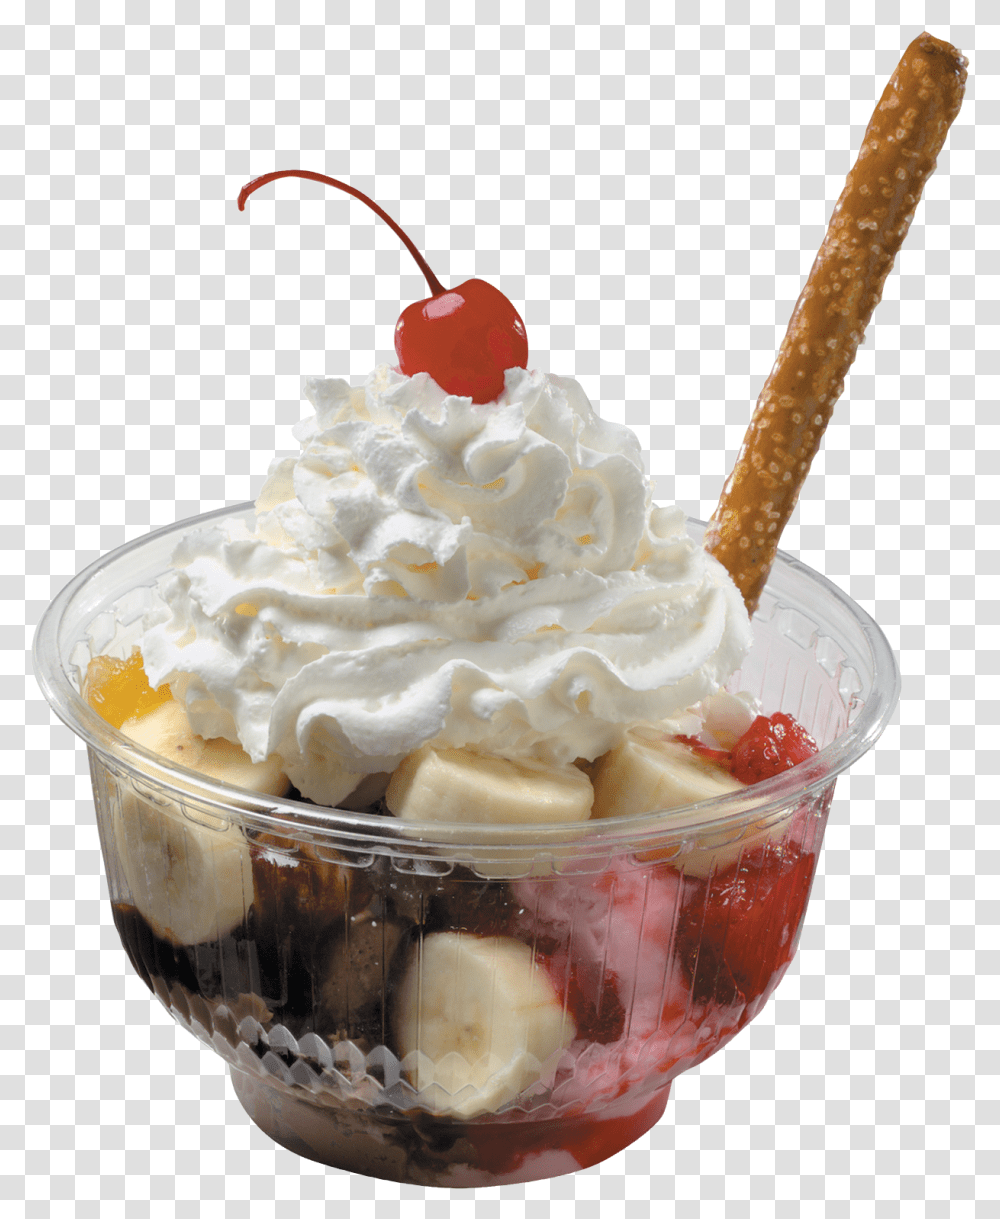 Go Bananas For Our Delicious Banana Splits Half Price Brusters Ice Cream Banana Split, Dessert, Food, Creme, Whipped Cream Transparent Png